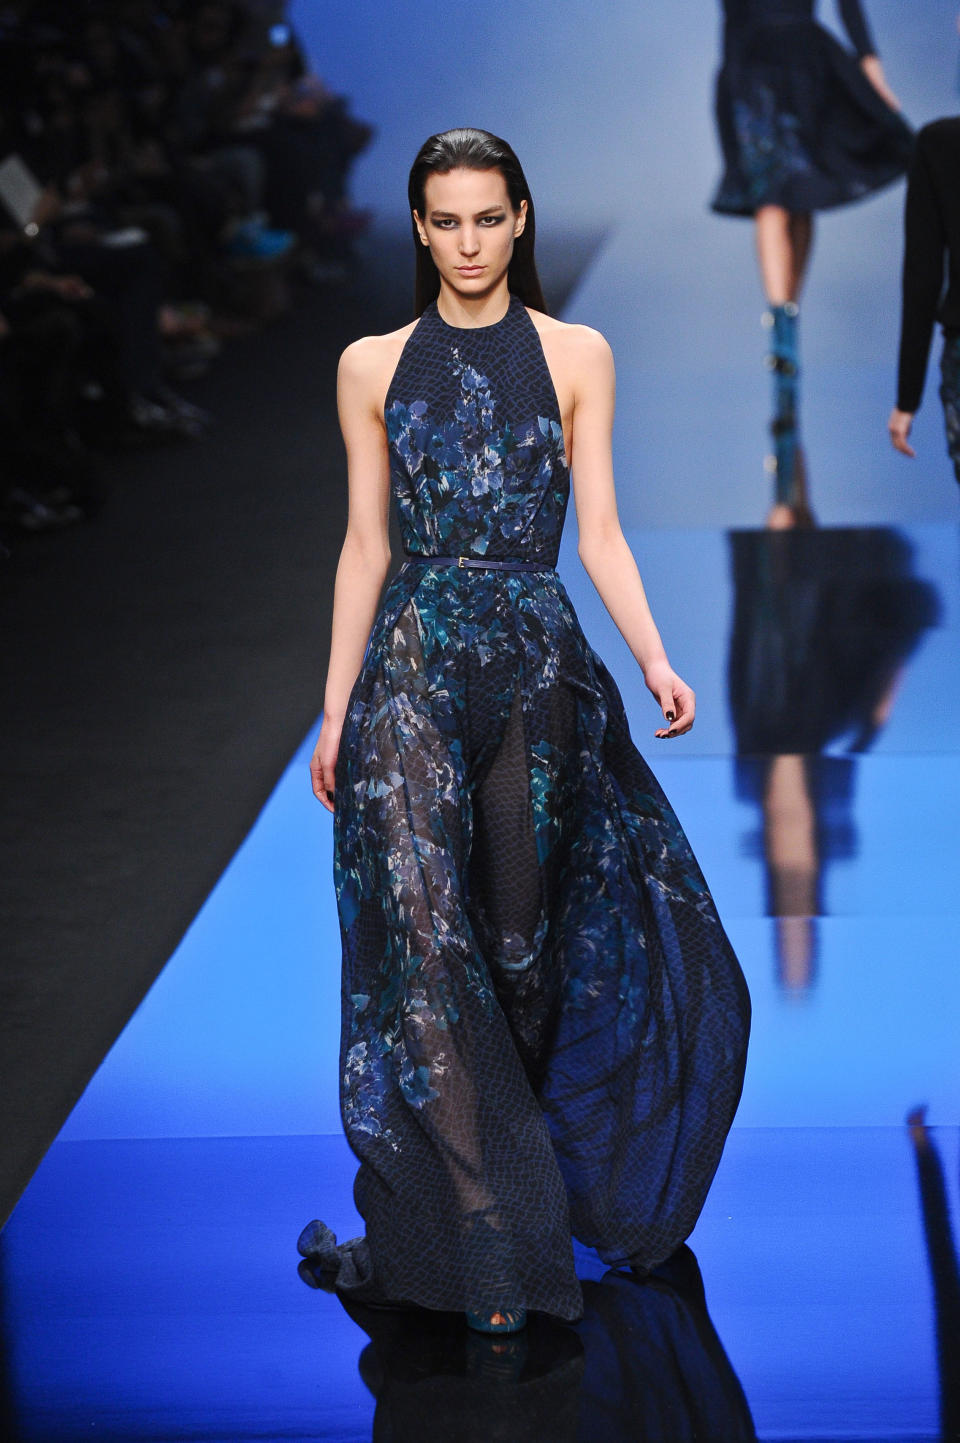 A model wears a creation by fashion designer Elie Saab for his Ready to Wear's Fall-Winter 2013-2014 fashion collection presented, Wednesday, March 6, 2013 in Paris. (AP Photo/Zacharie Scheurer)